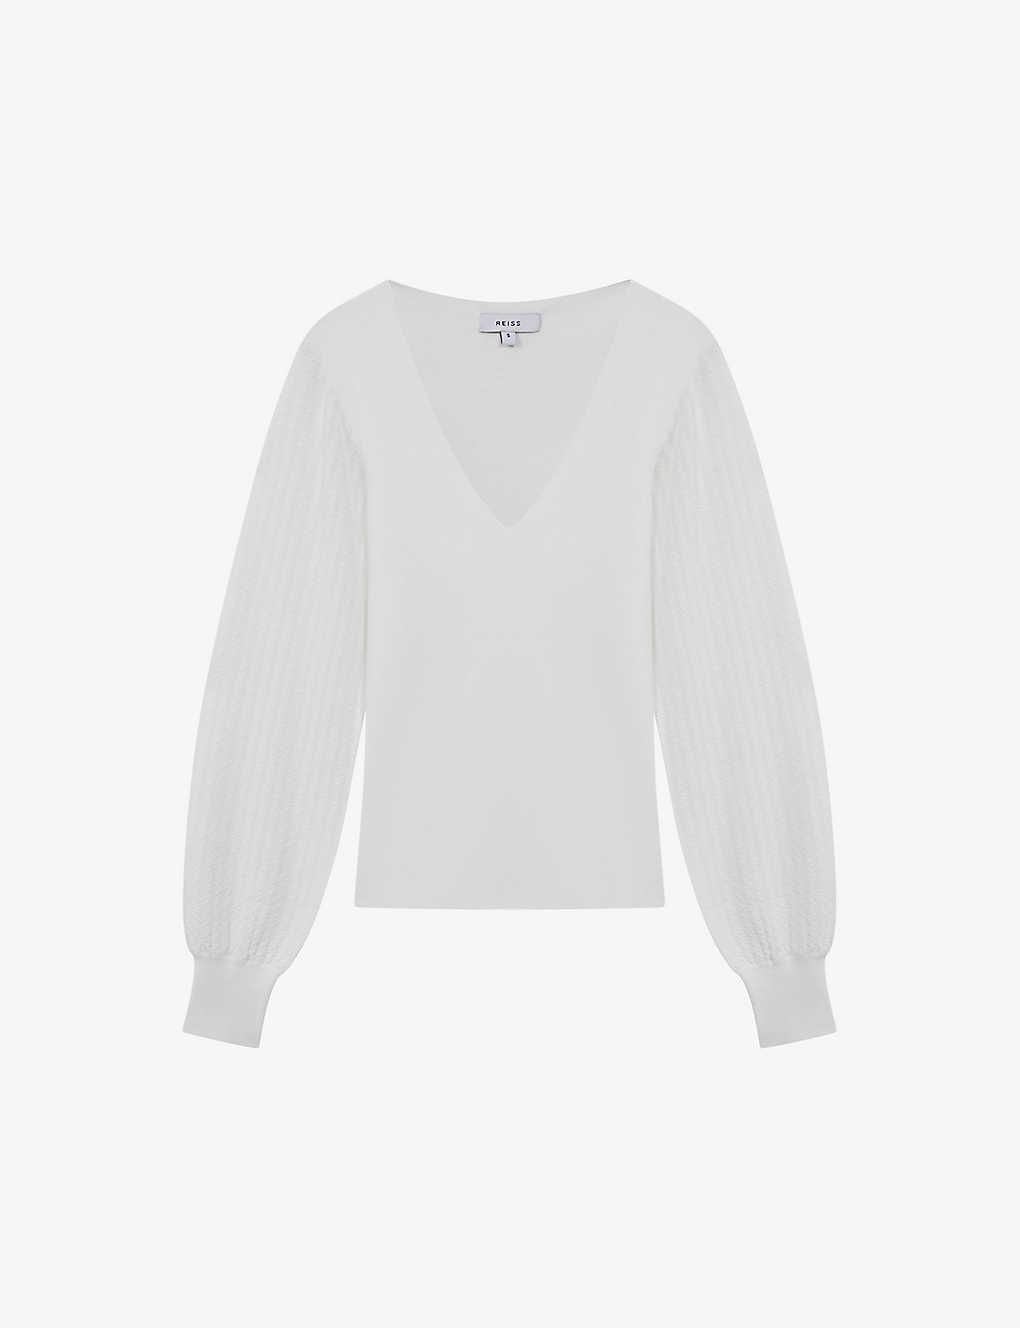 Reiss Lexi - Ivory Knitted Sleeve V-neck Top, L